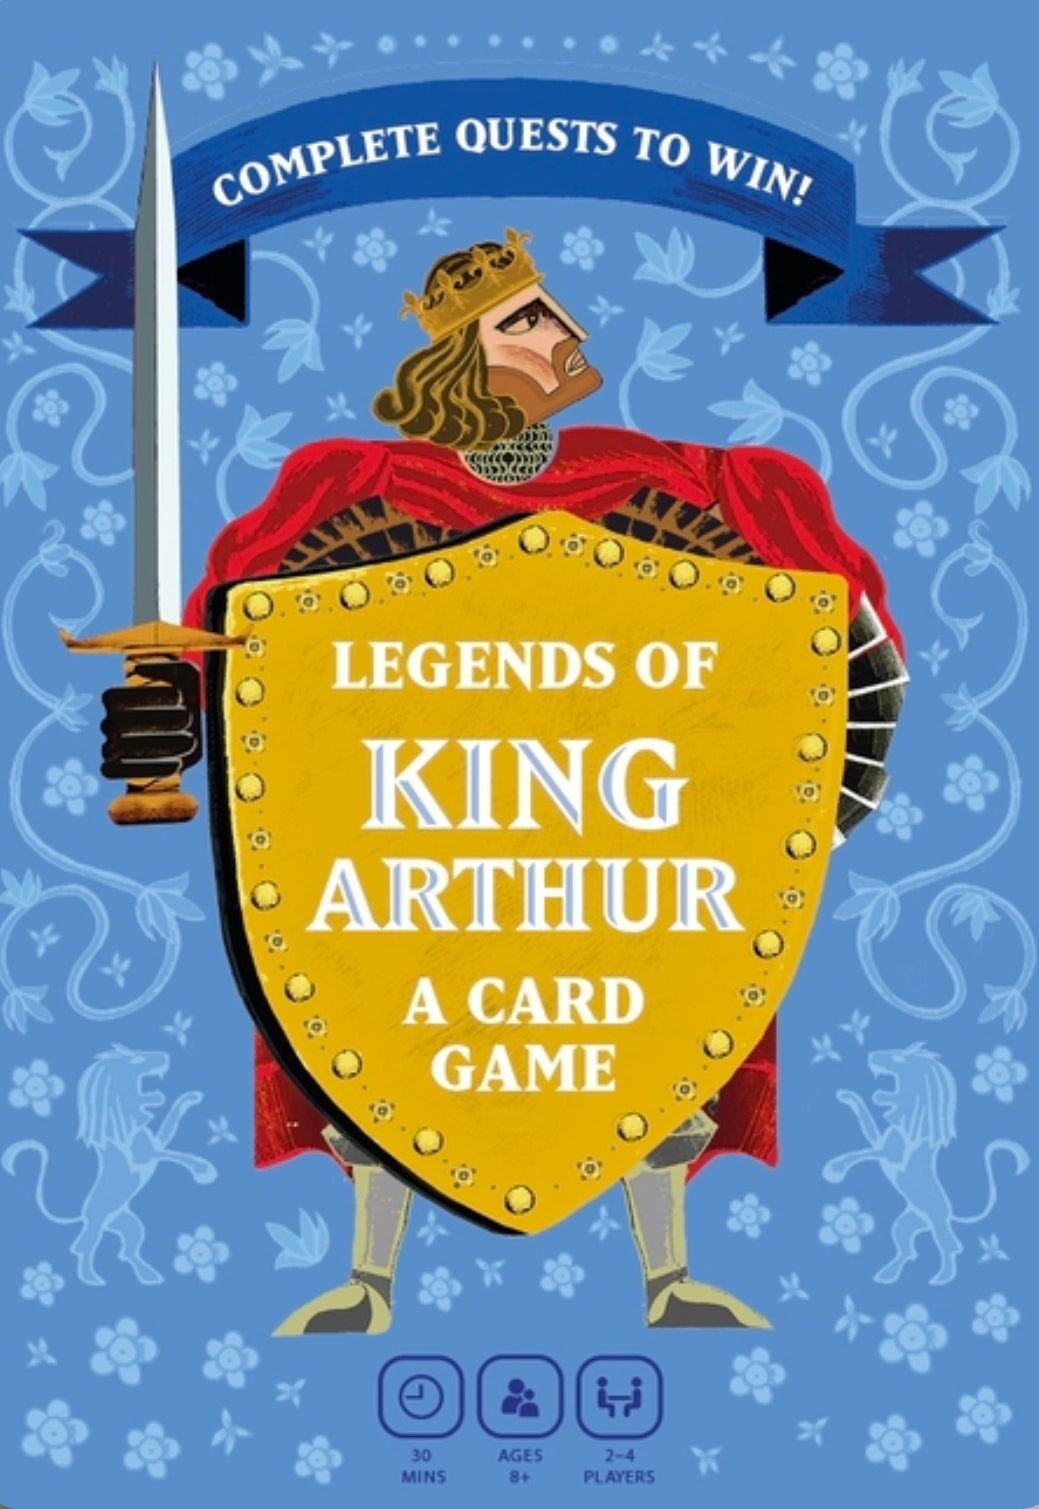 The Legend of King Arthur: A Quest Card Game